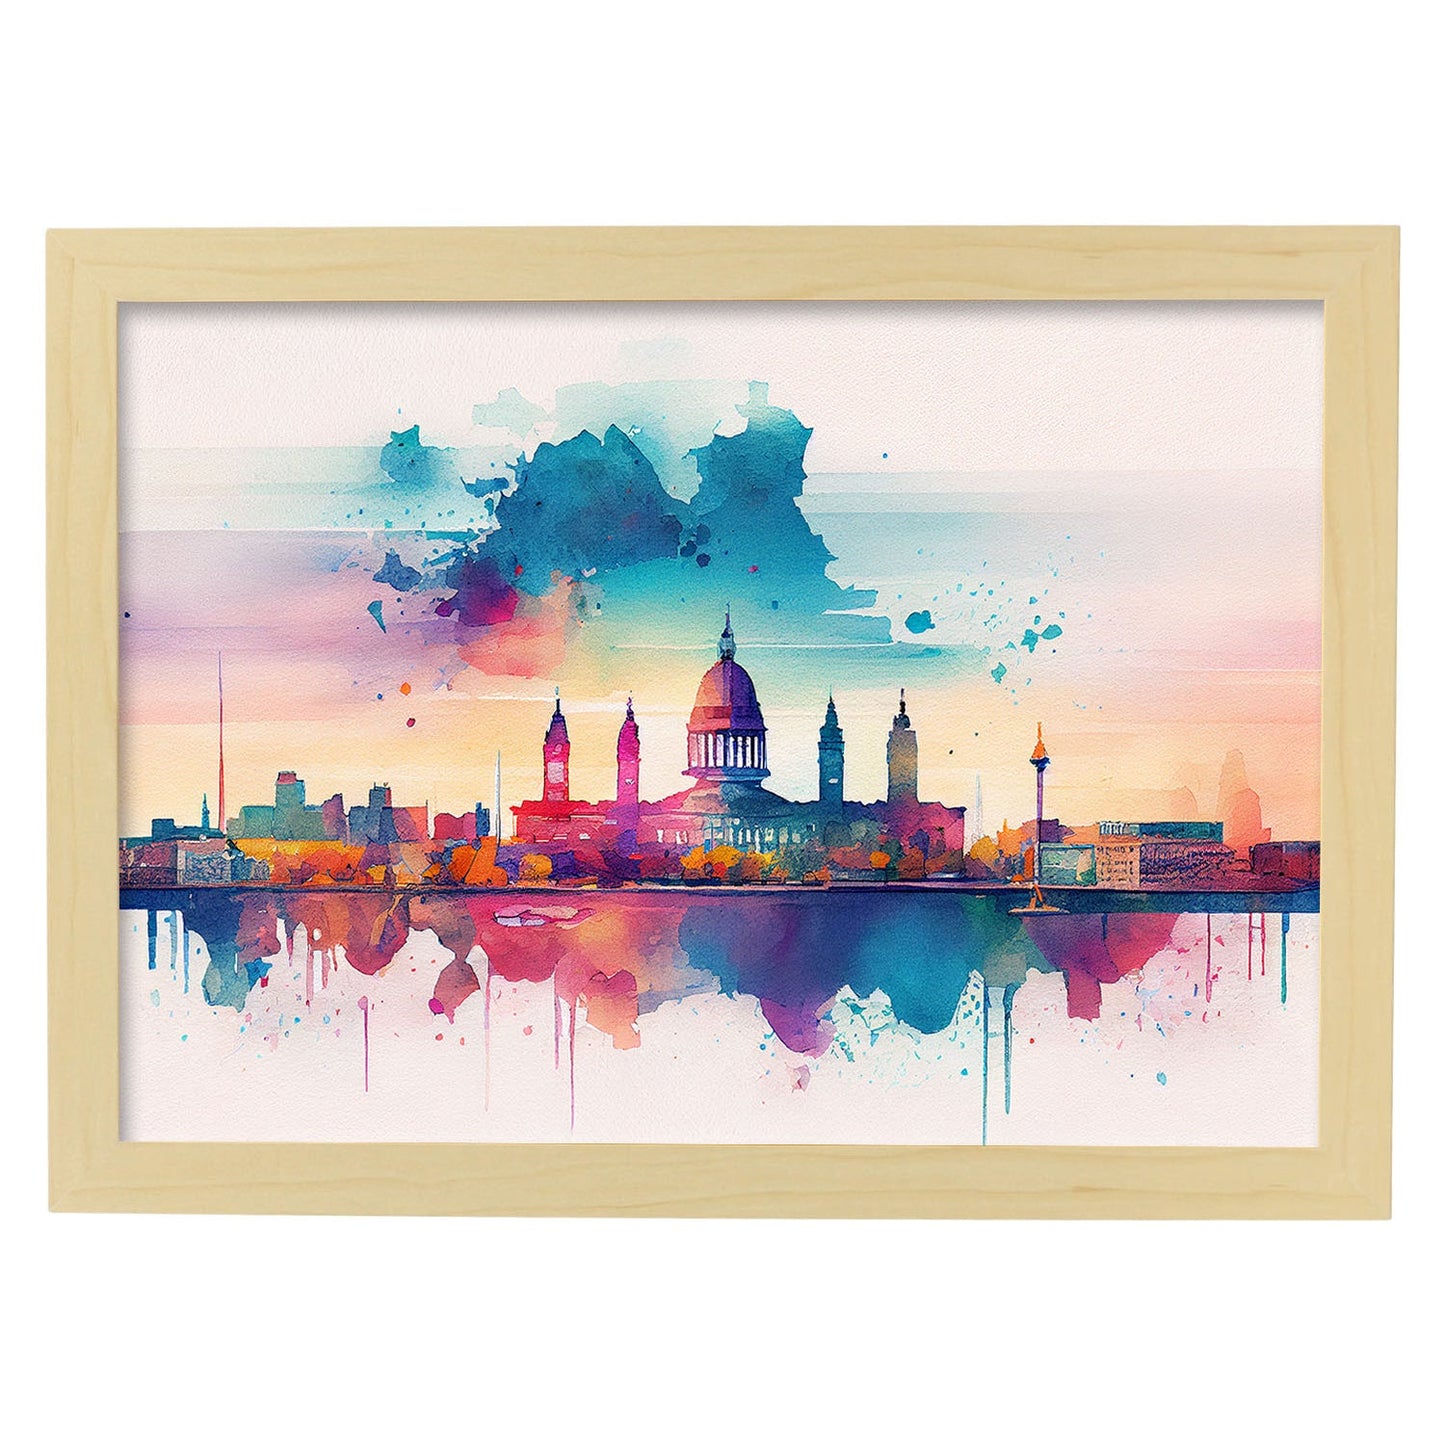 Nacnic watercolor of a skyline of the city of Helsinki. Aesthetic Wall Art Prints for Bedroom or Living Room Design.-Artwork-Nacnic-A4-Marco Madera Clara-Nacnic Estudio SL